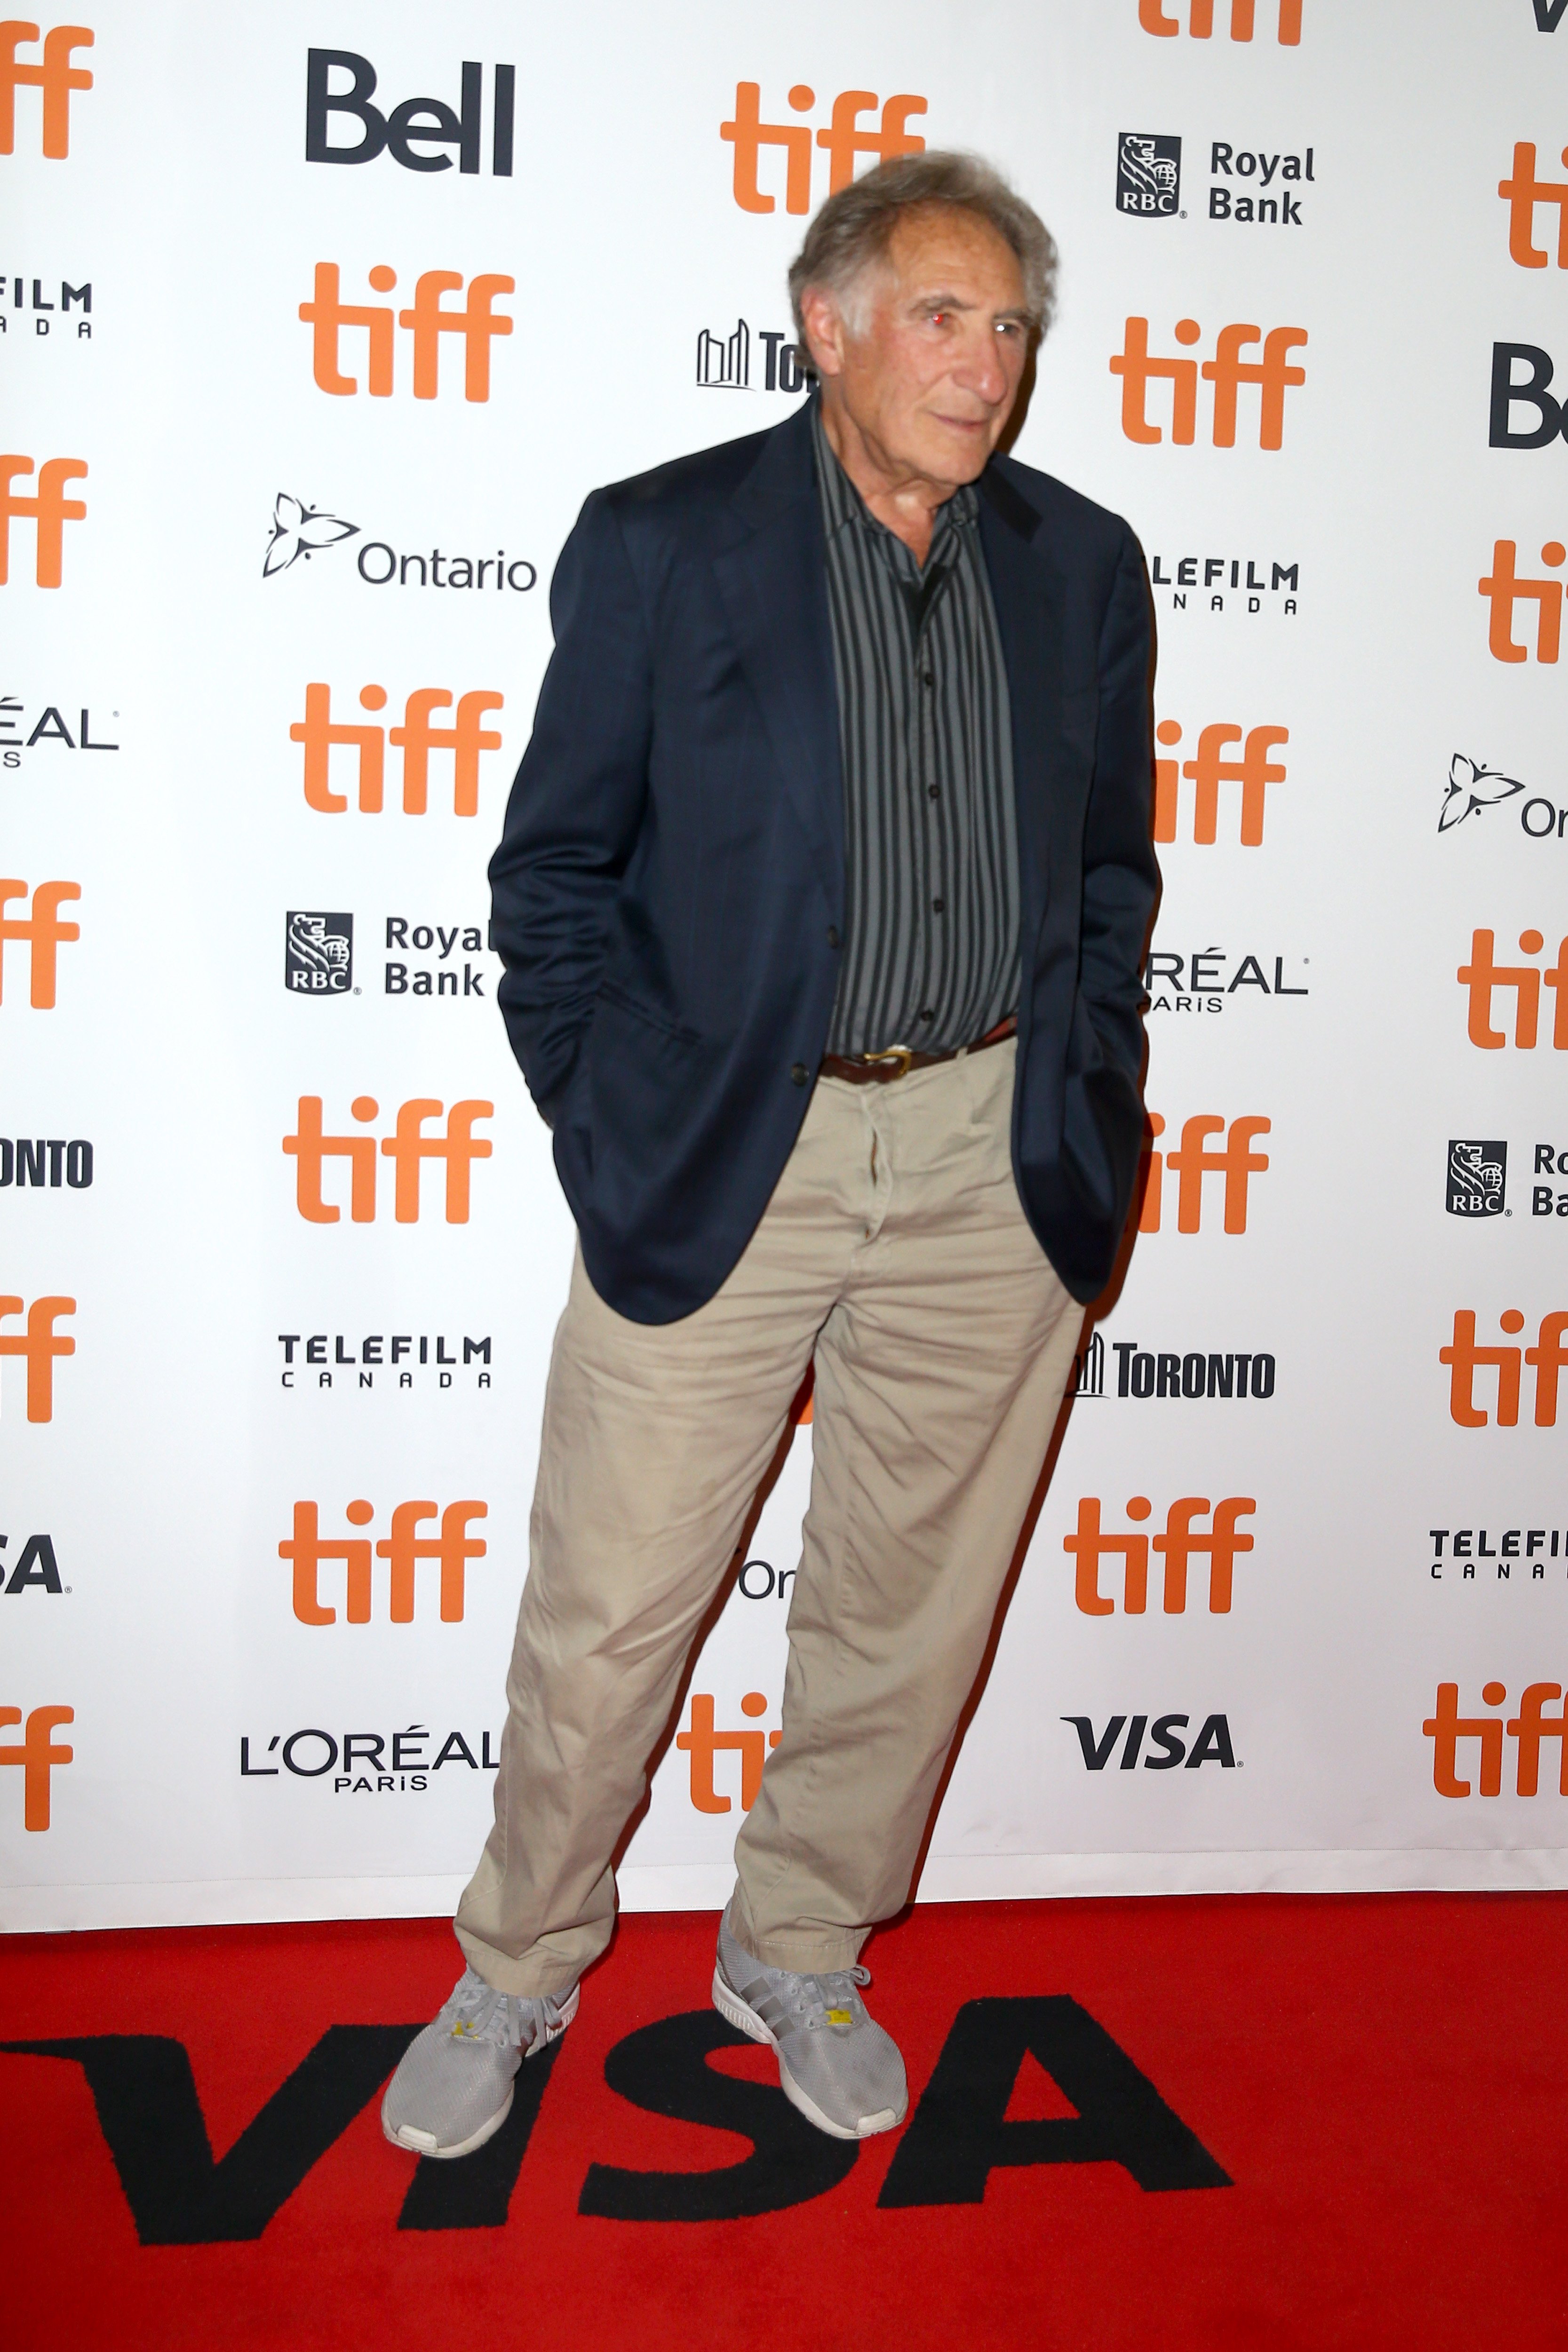 Judd Hirsch at the "Uncut Gems" premiere on September 9, 2019, in Toronto, Canada. | Source: Getty Images